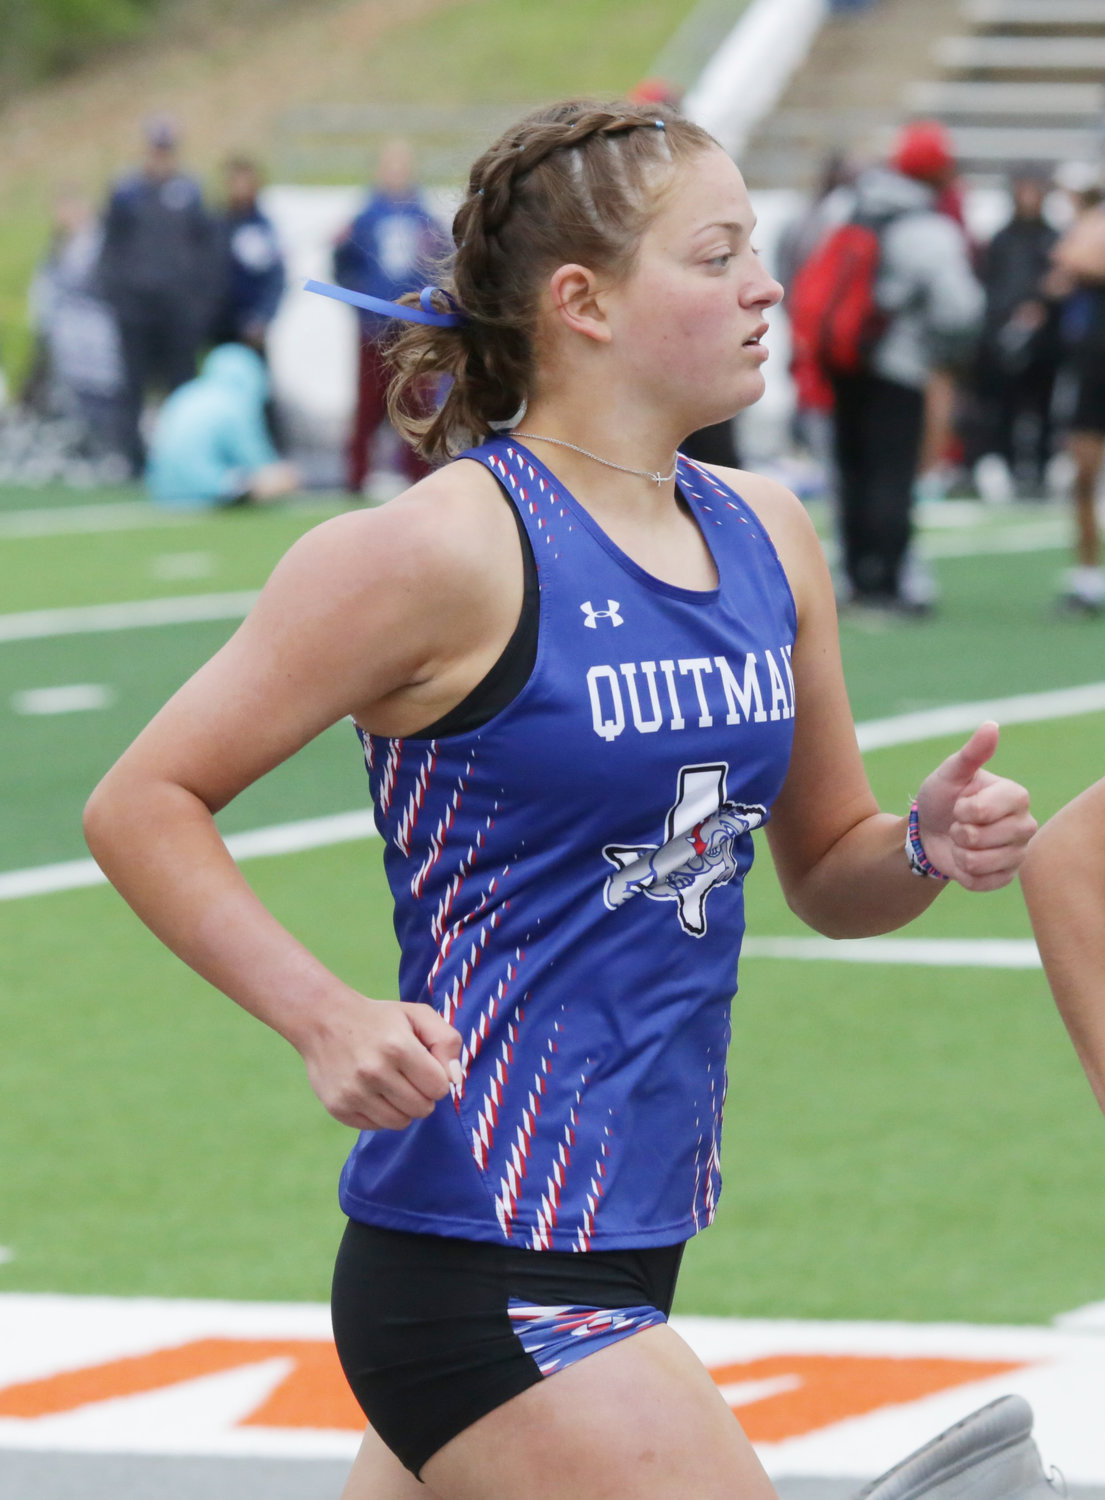 Madyson Pence competes for Quitman in the 800 meter race.